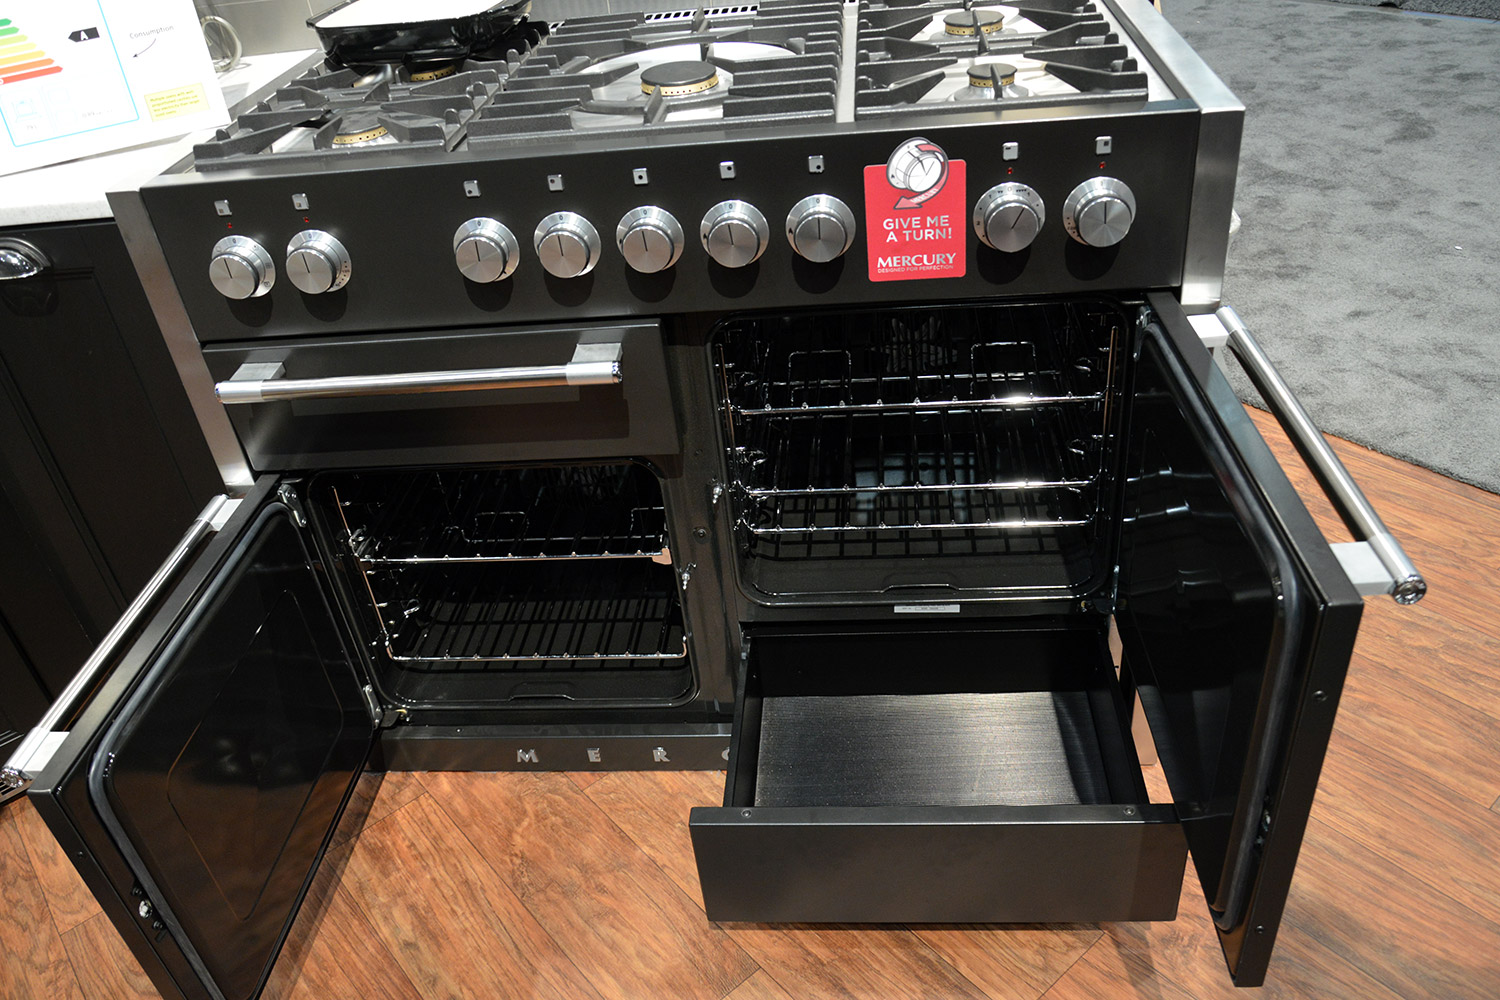 agas mercury oven will have a 48 inch induction cooktop aga marvel new luxury pro style ranges 3